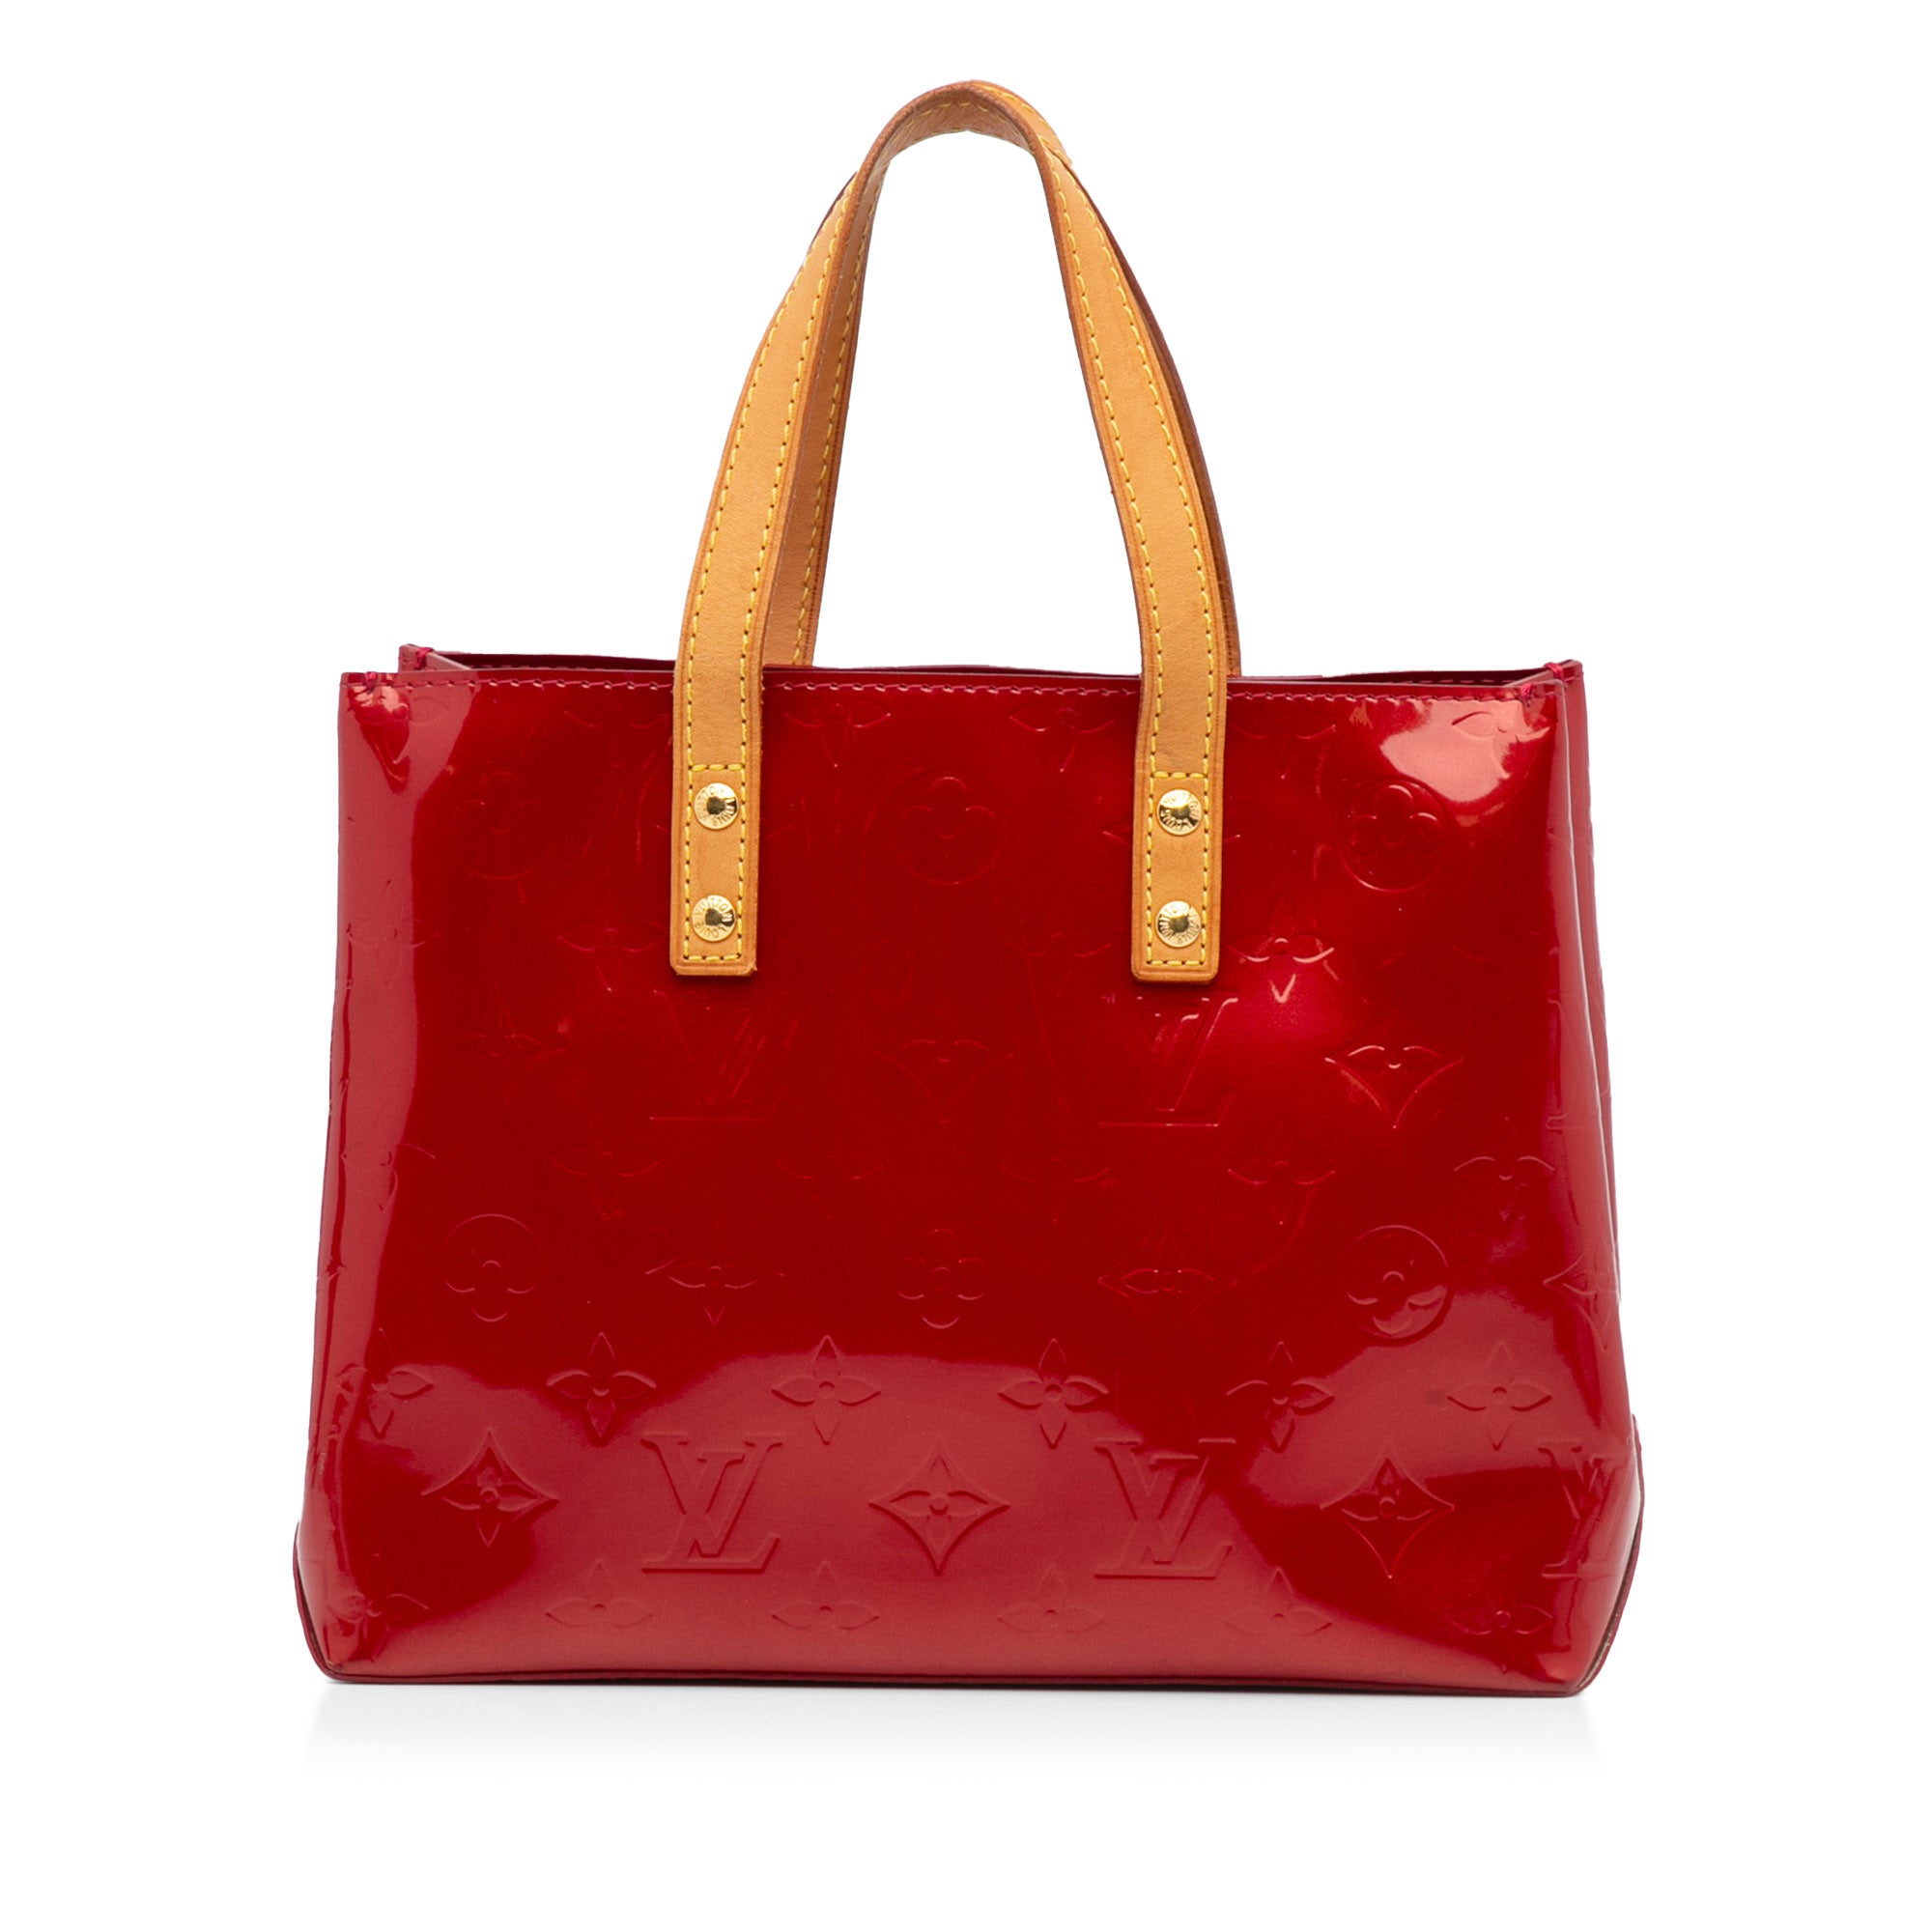 red louis vuitton tote